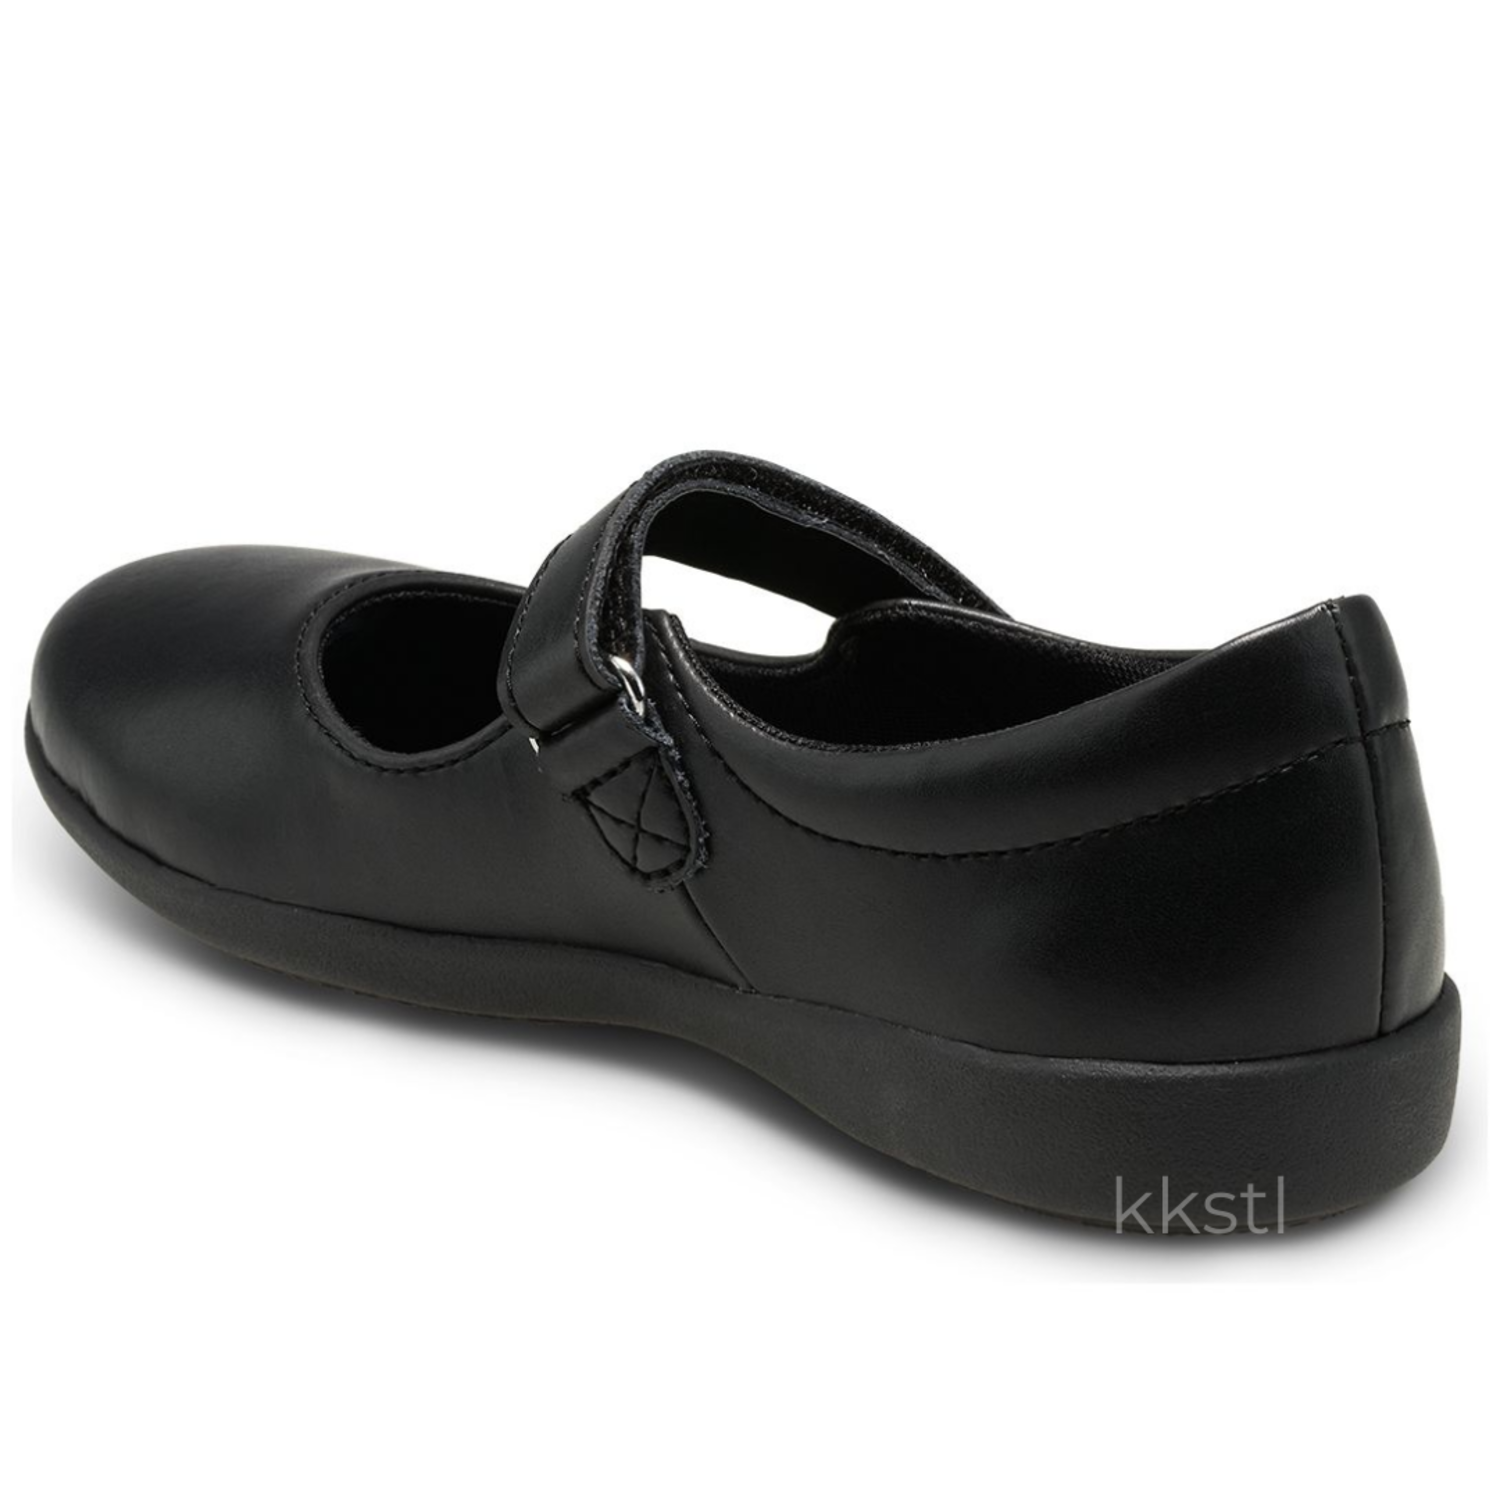 Hush Puppies Reese Kid's Easy On/Off Mary Jane Shoe, Sizes 1-13.5 -  Walmart.com